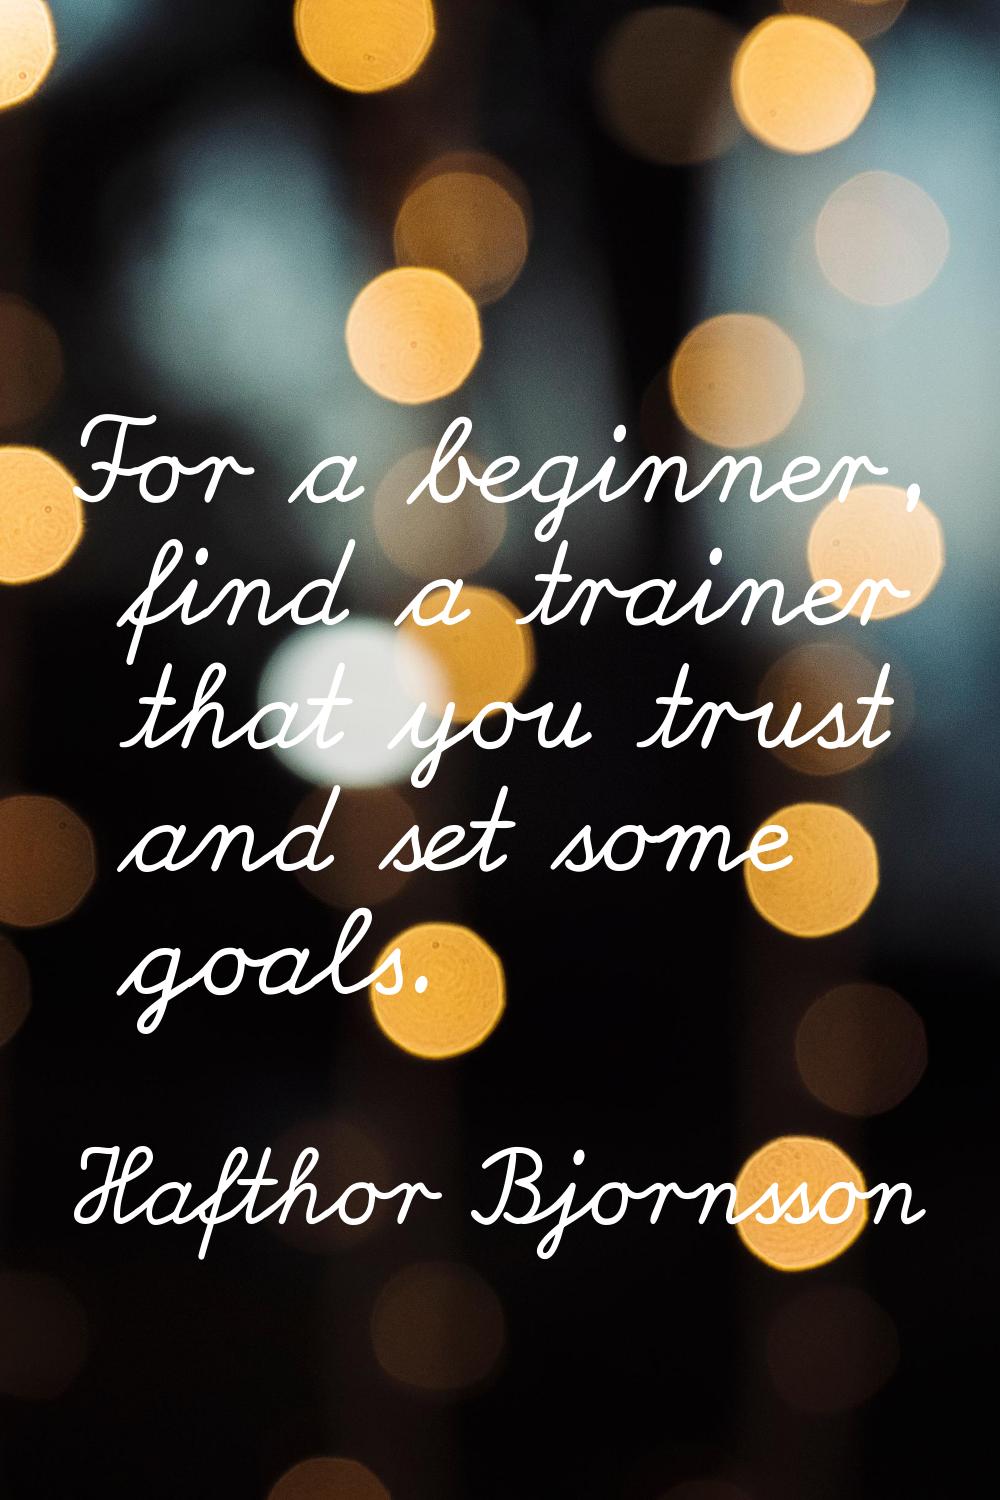 For a beginner, find a trainer that you trust and set some goals.